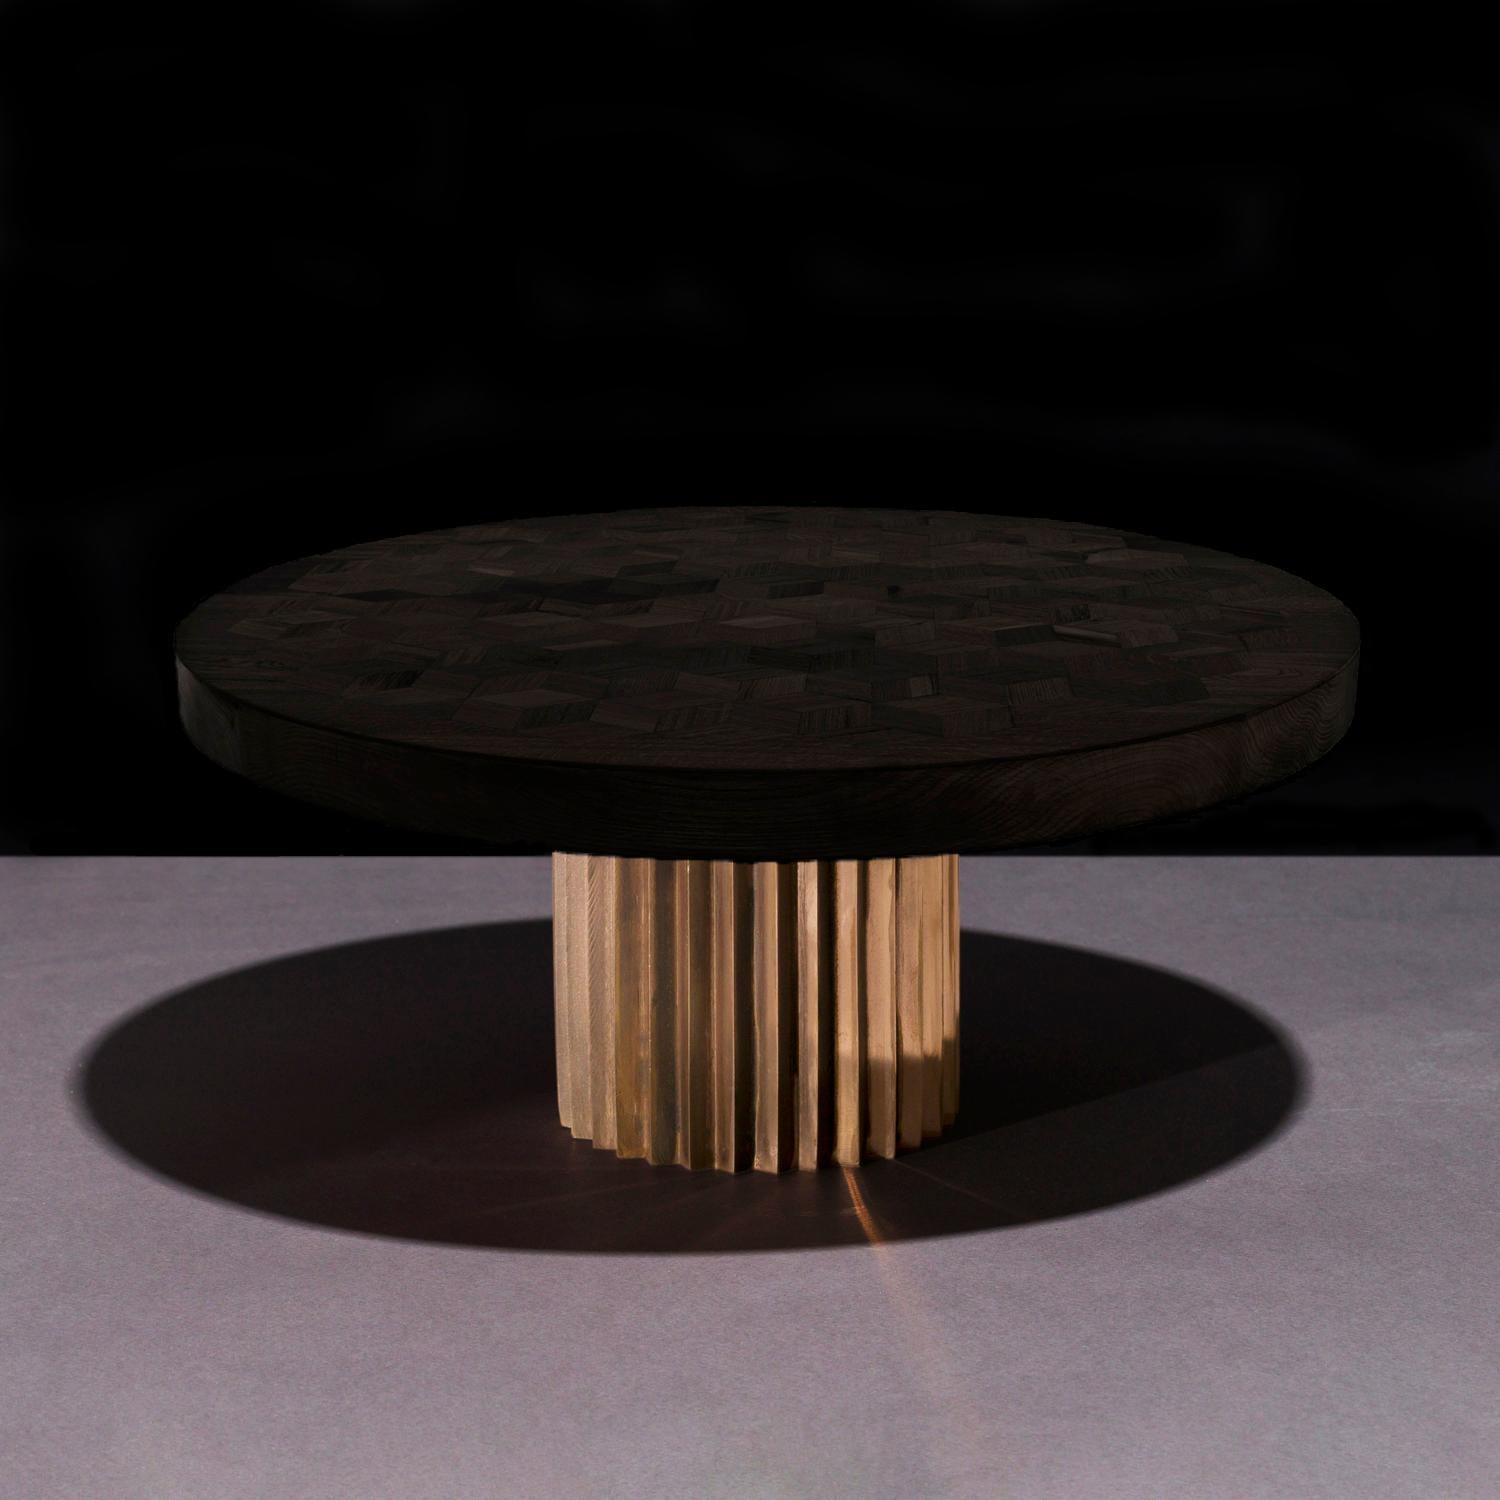 Dining or entrance table with marquetry top in ebonized Oak and multifaceted pedestal in cast bronze. 

The marquetry tabletop in reclaimed Oak contains 222 rhombi cut from old Italian wine barrels. Inspired by Doric columns in archaic architecture,